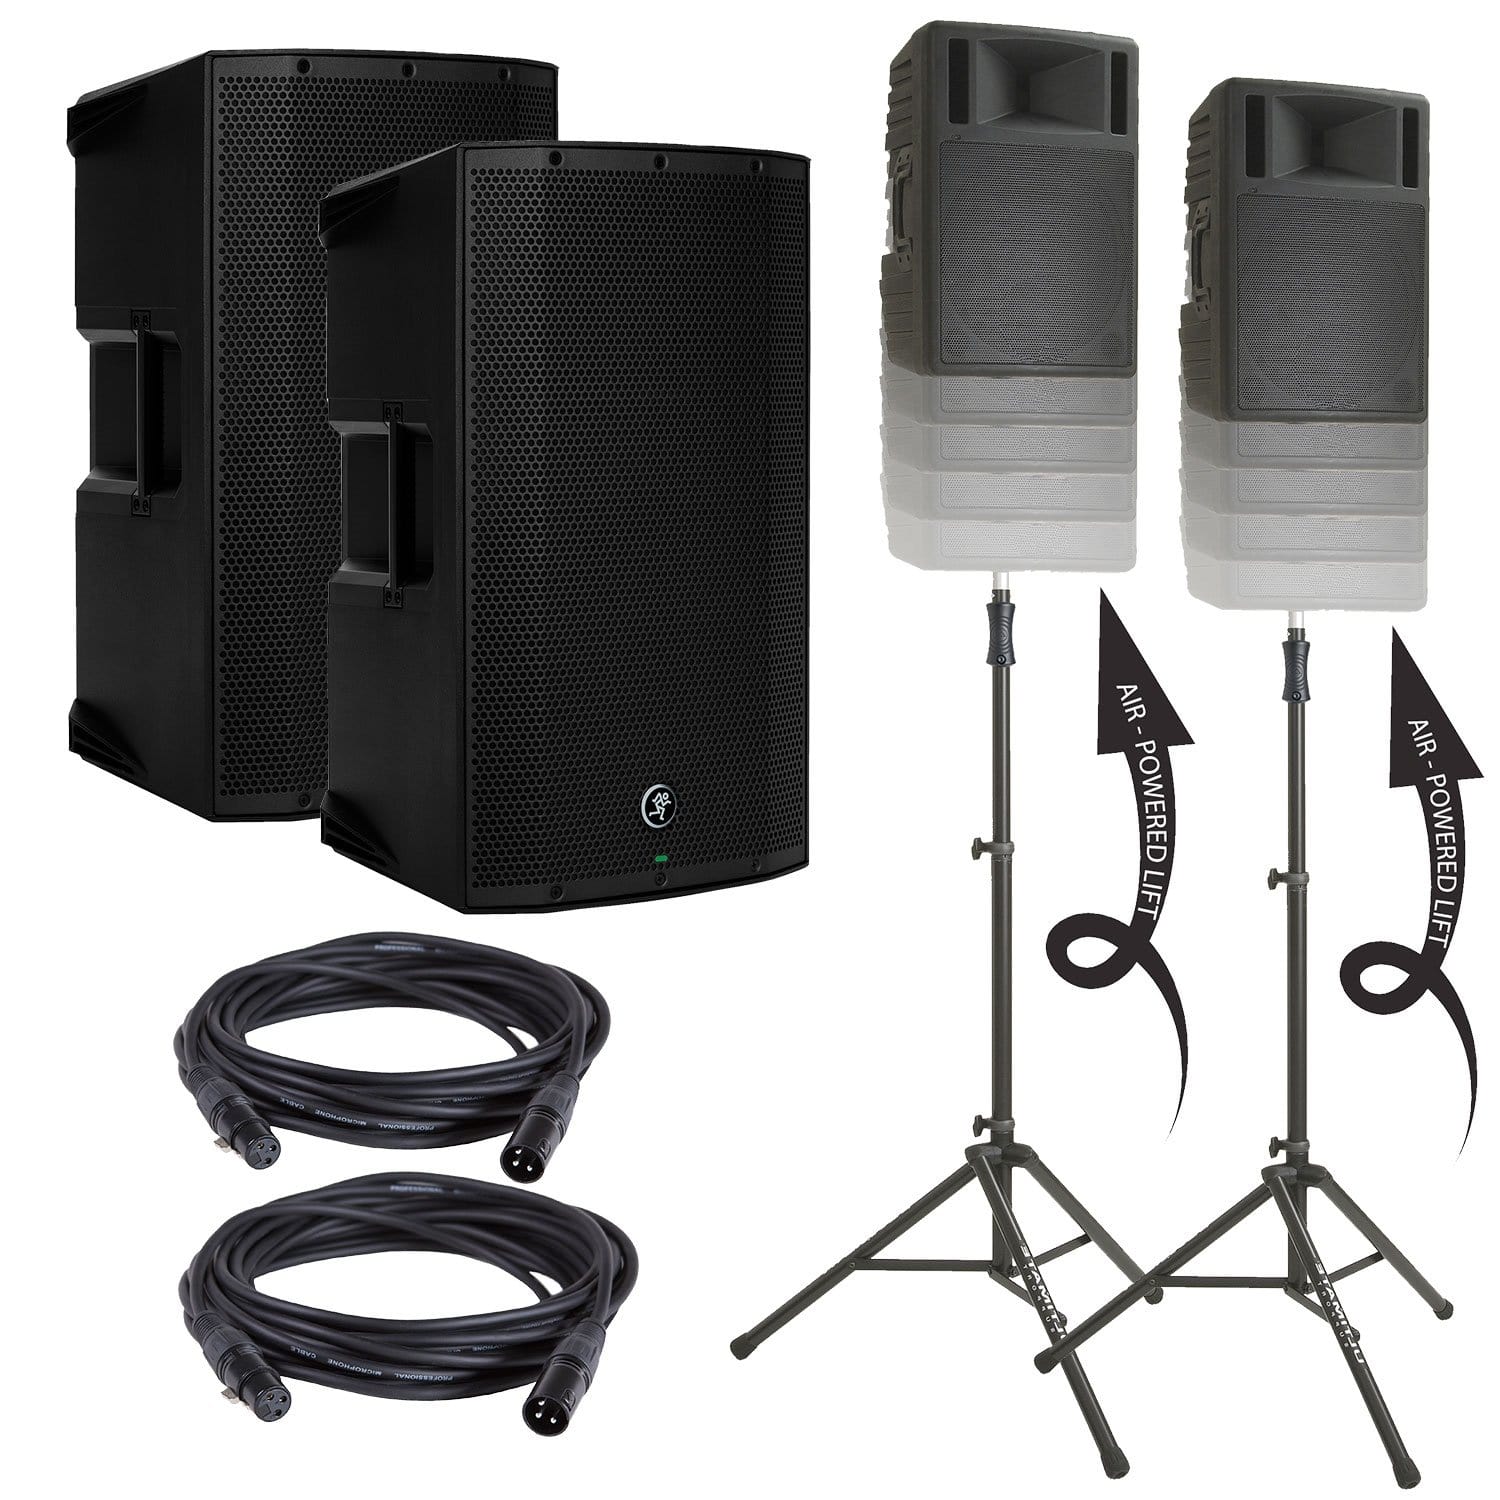 Mackie Thump12BST Speakers & Ultimate TS-100-B Stands with Gator Totes - PSSL ProSound and Stage Lighting